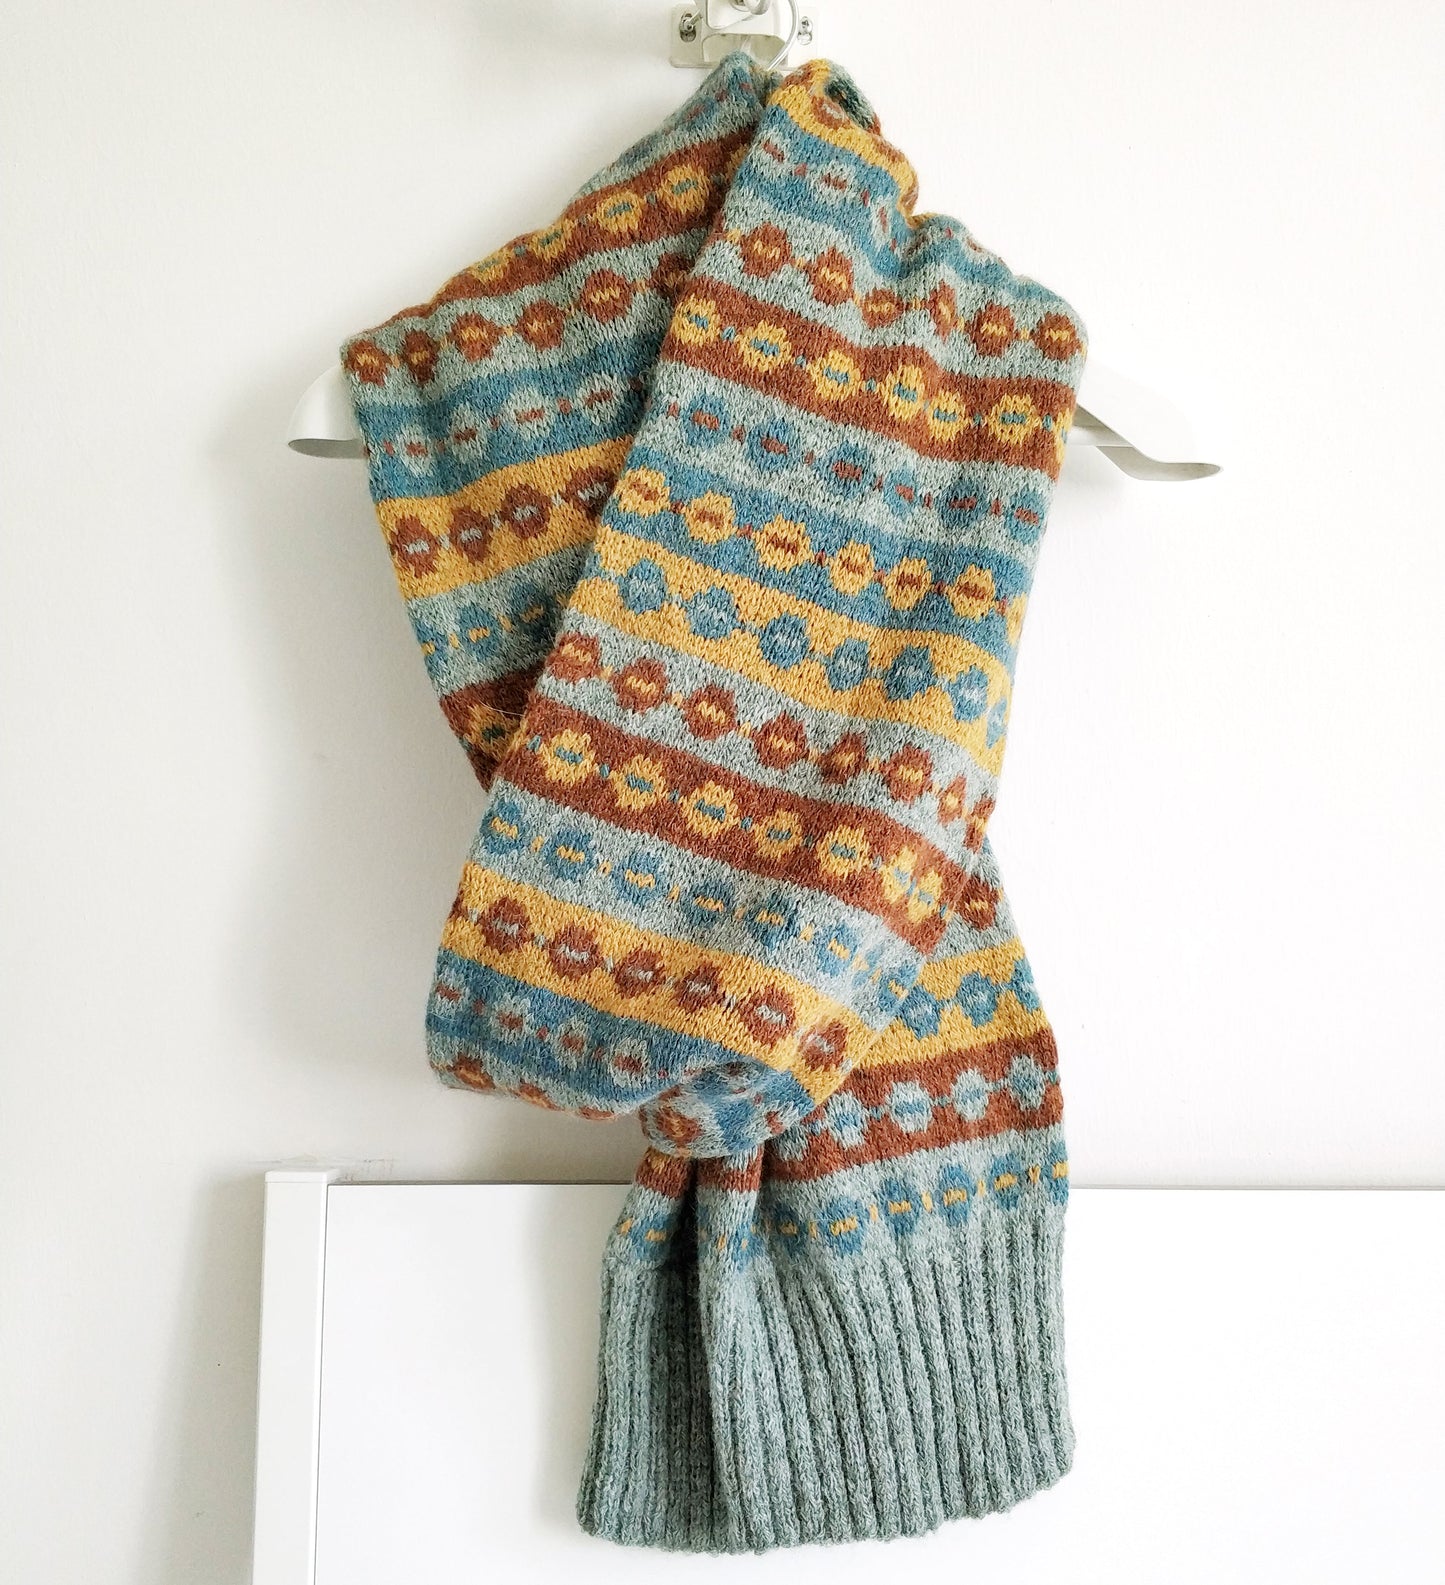 grey blue, yellow and brown wool long hand-knitted Fair Isle scarf